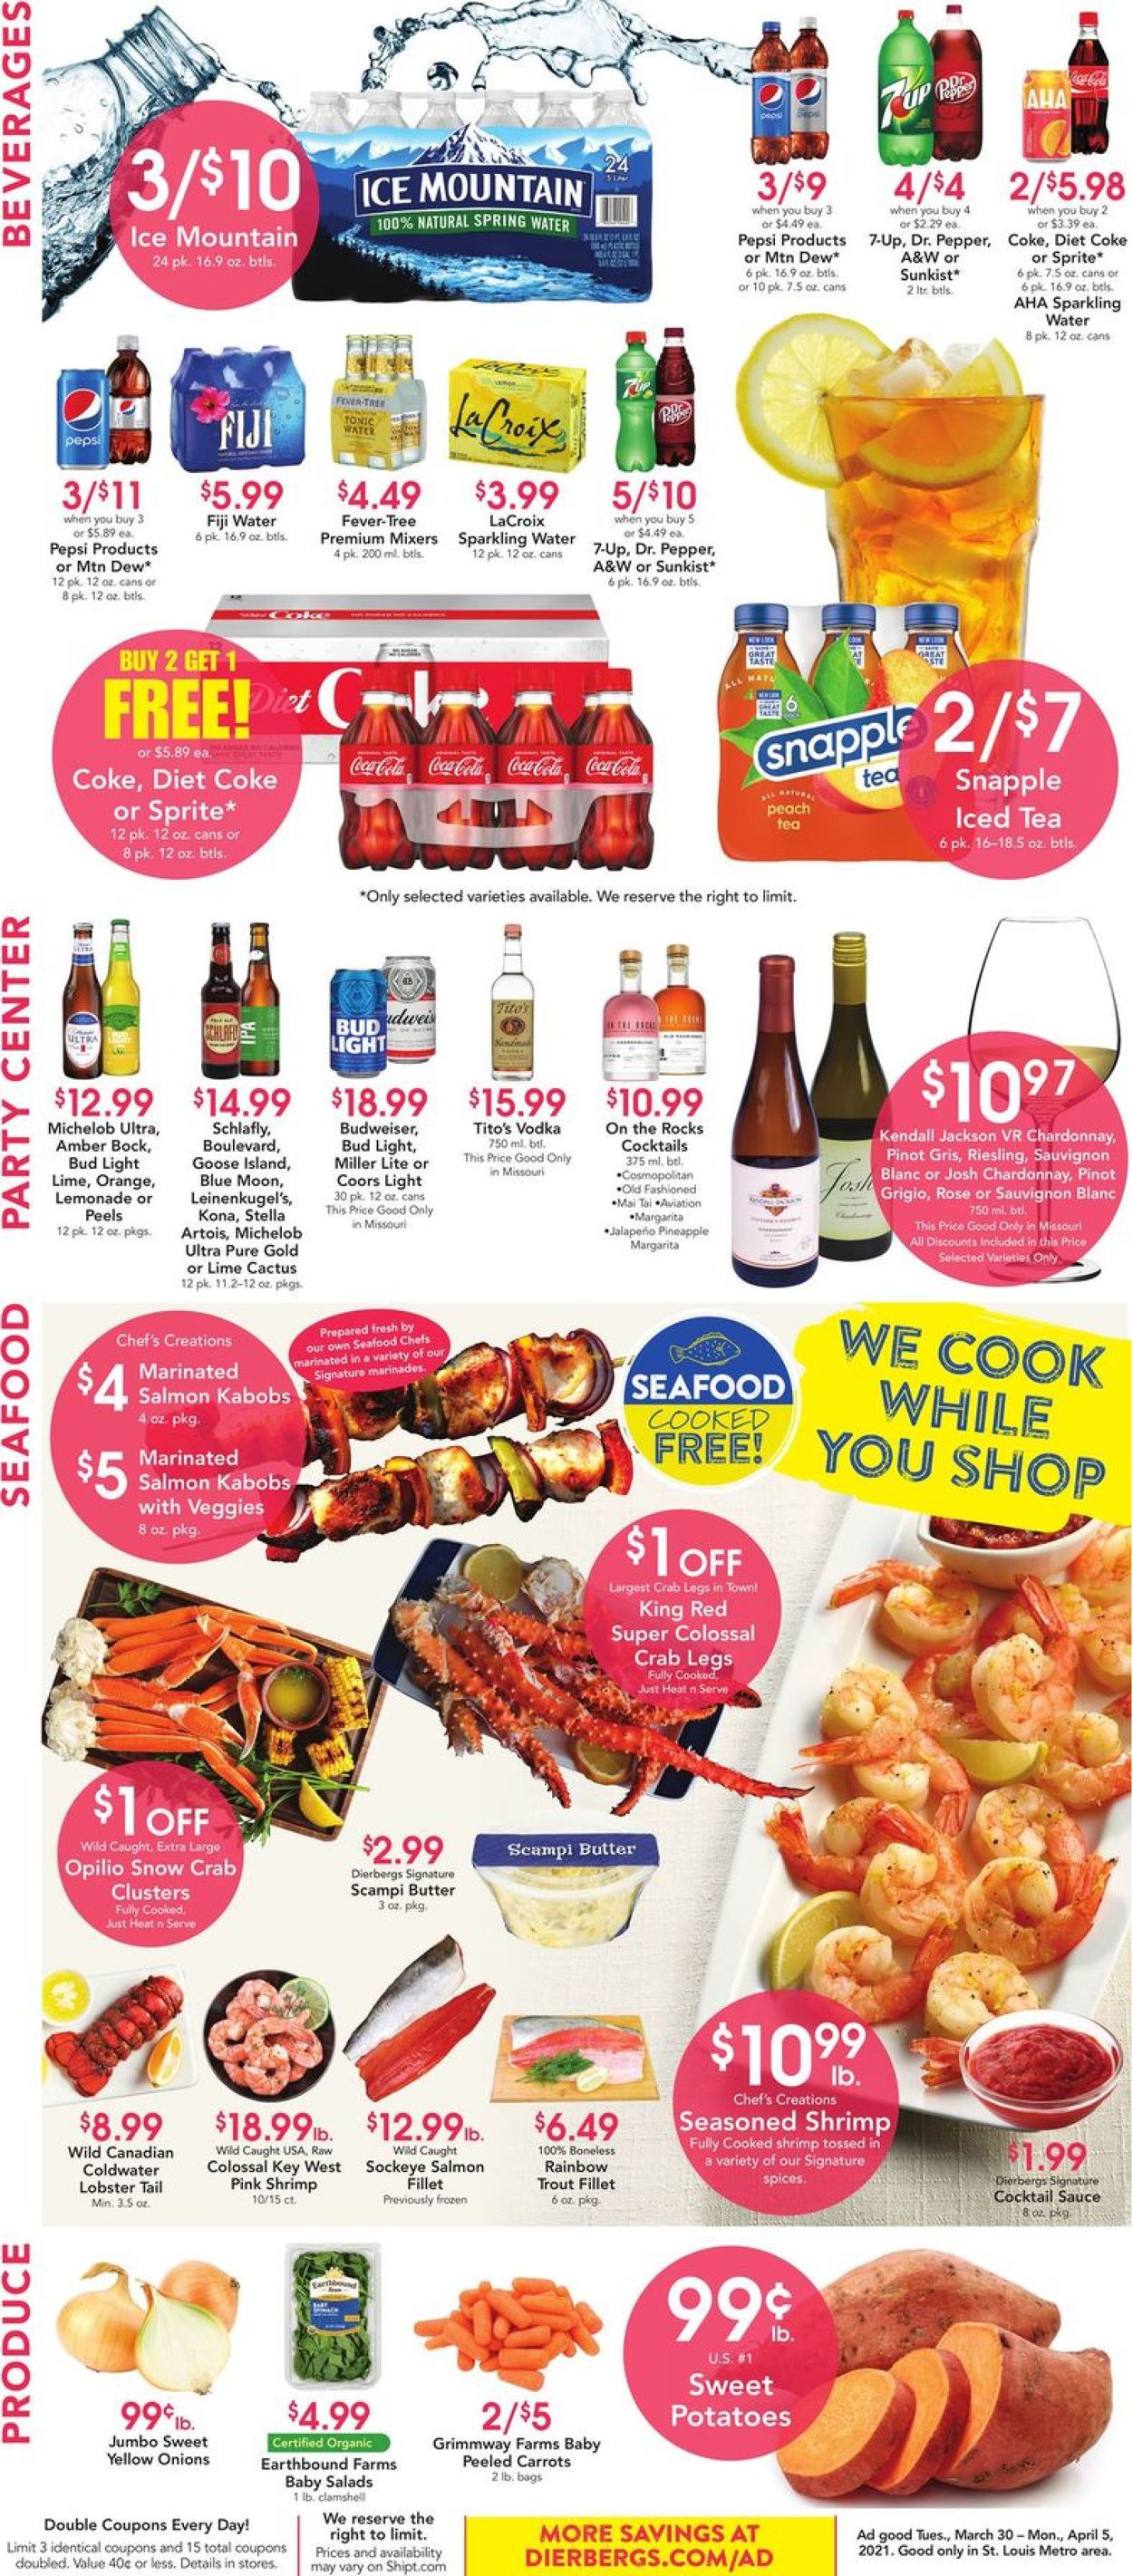 Dierbergs Easter 2021 ad Ad Circular 03/30 04/05/2021 (Page 7